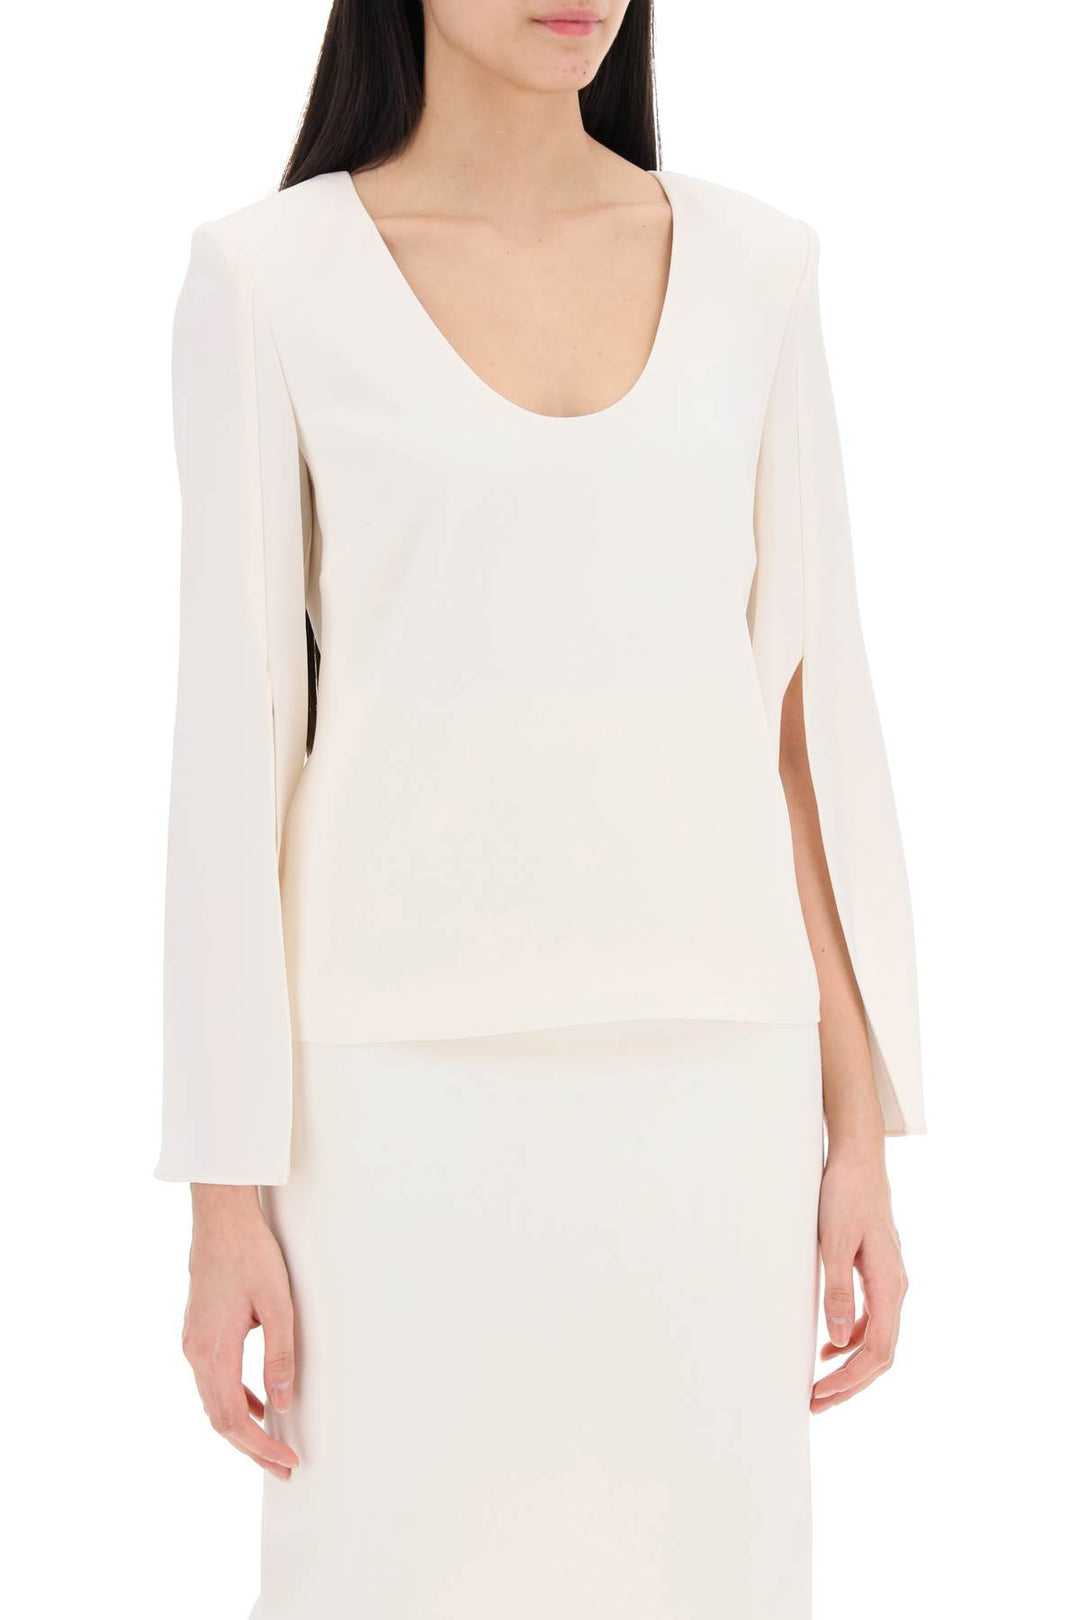 Roland Mouret Replace With Double Quotecady Top With Flared Sleevereplace With Double Quote   White